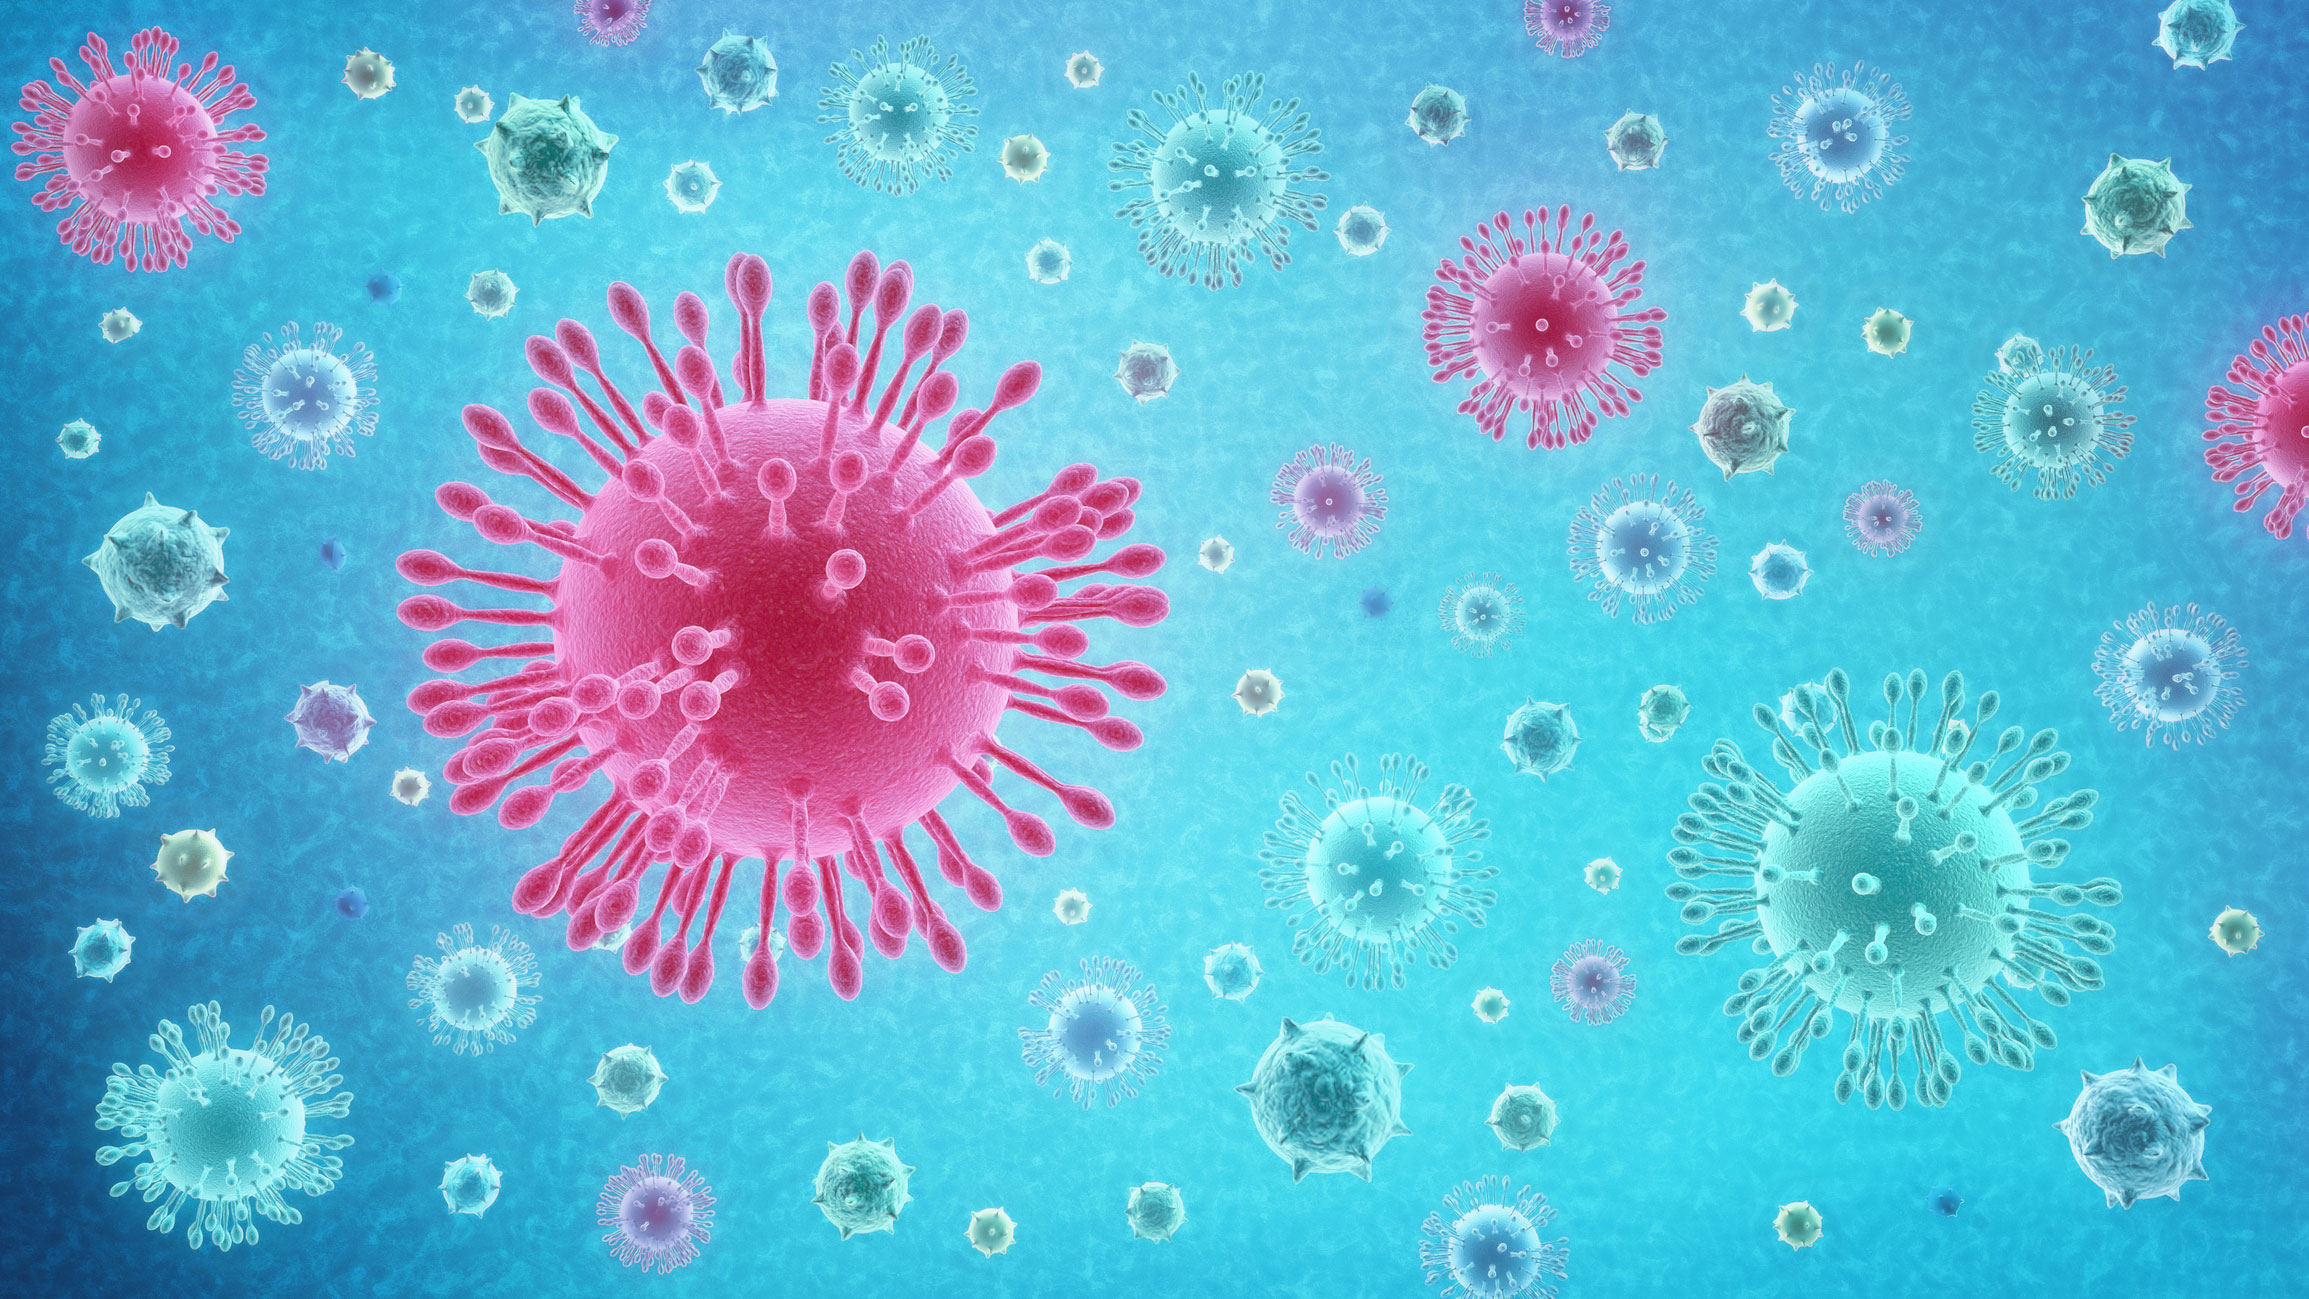 Conceptual illustration of the coronavirus as if it were observed from a microscope.